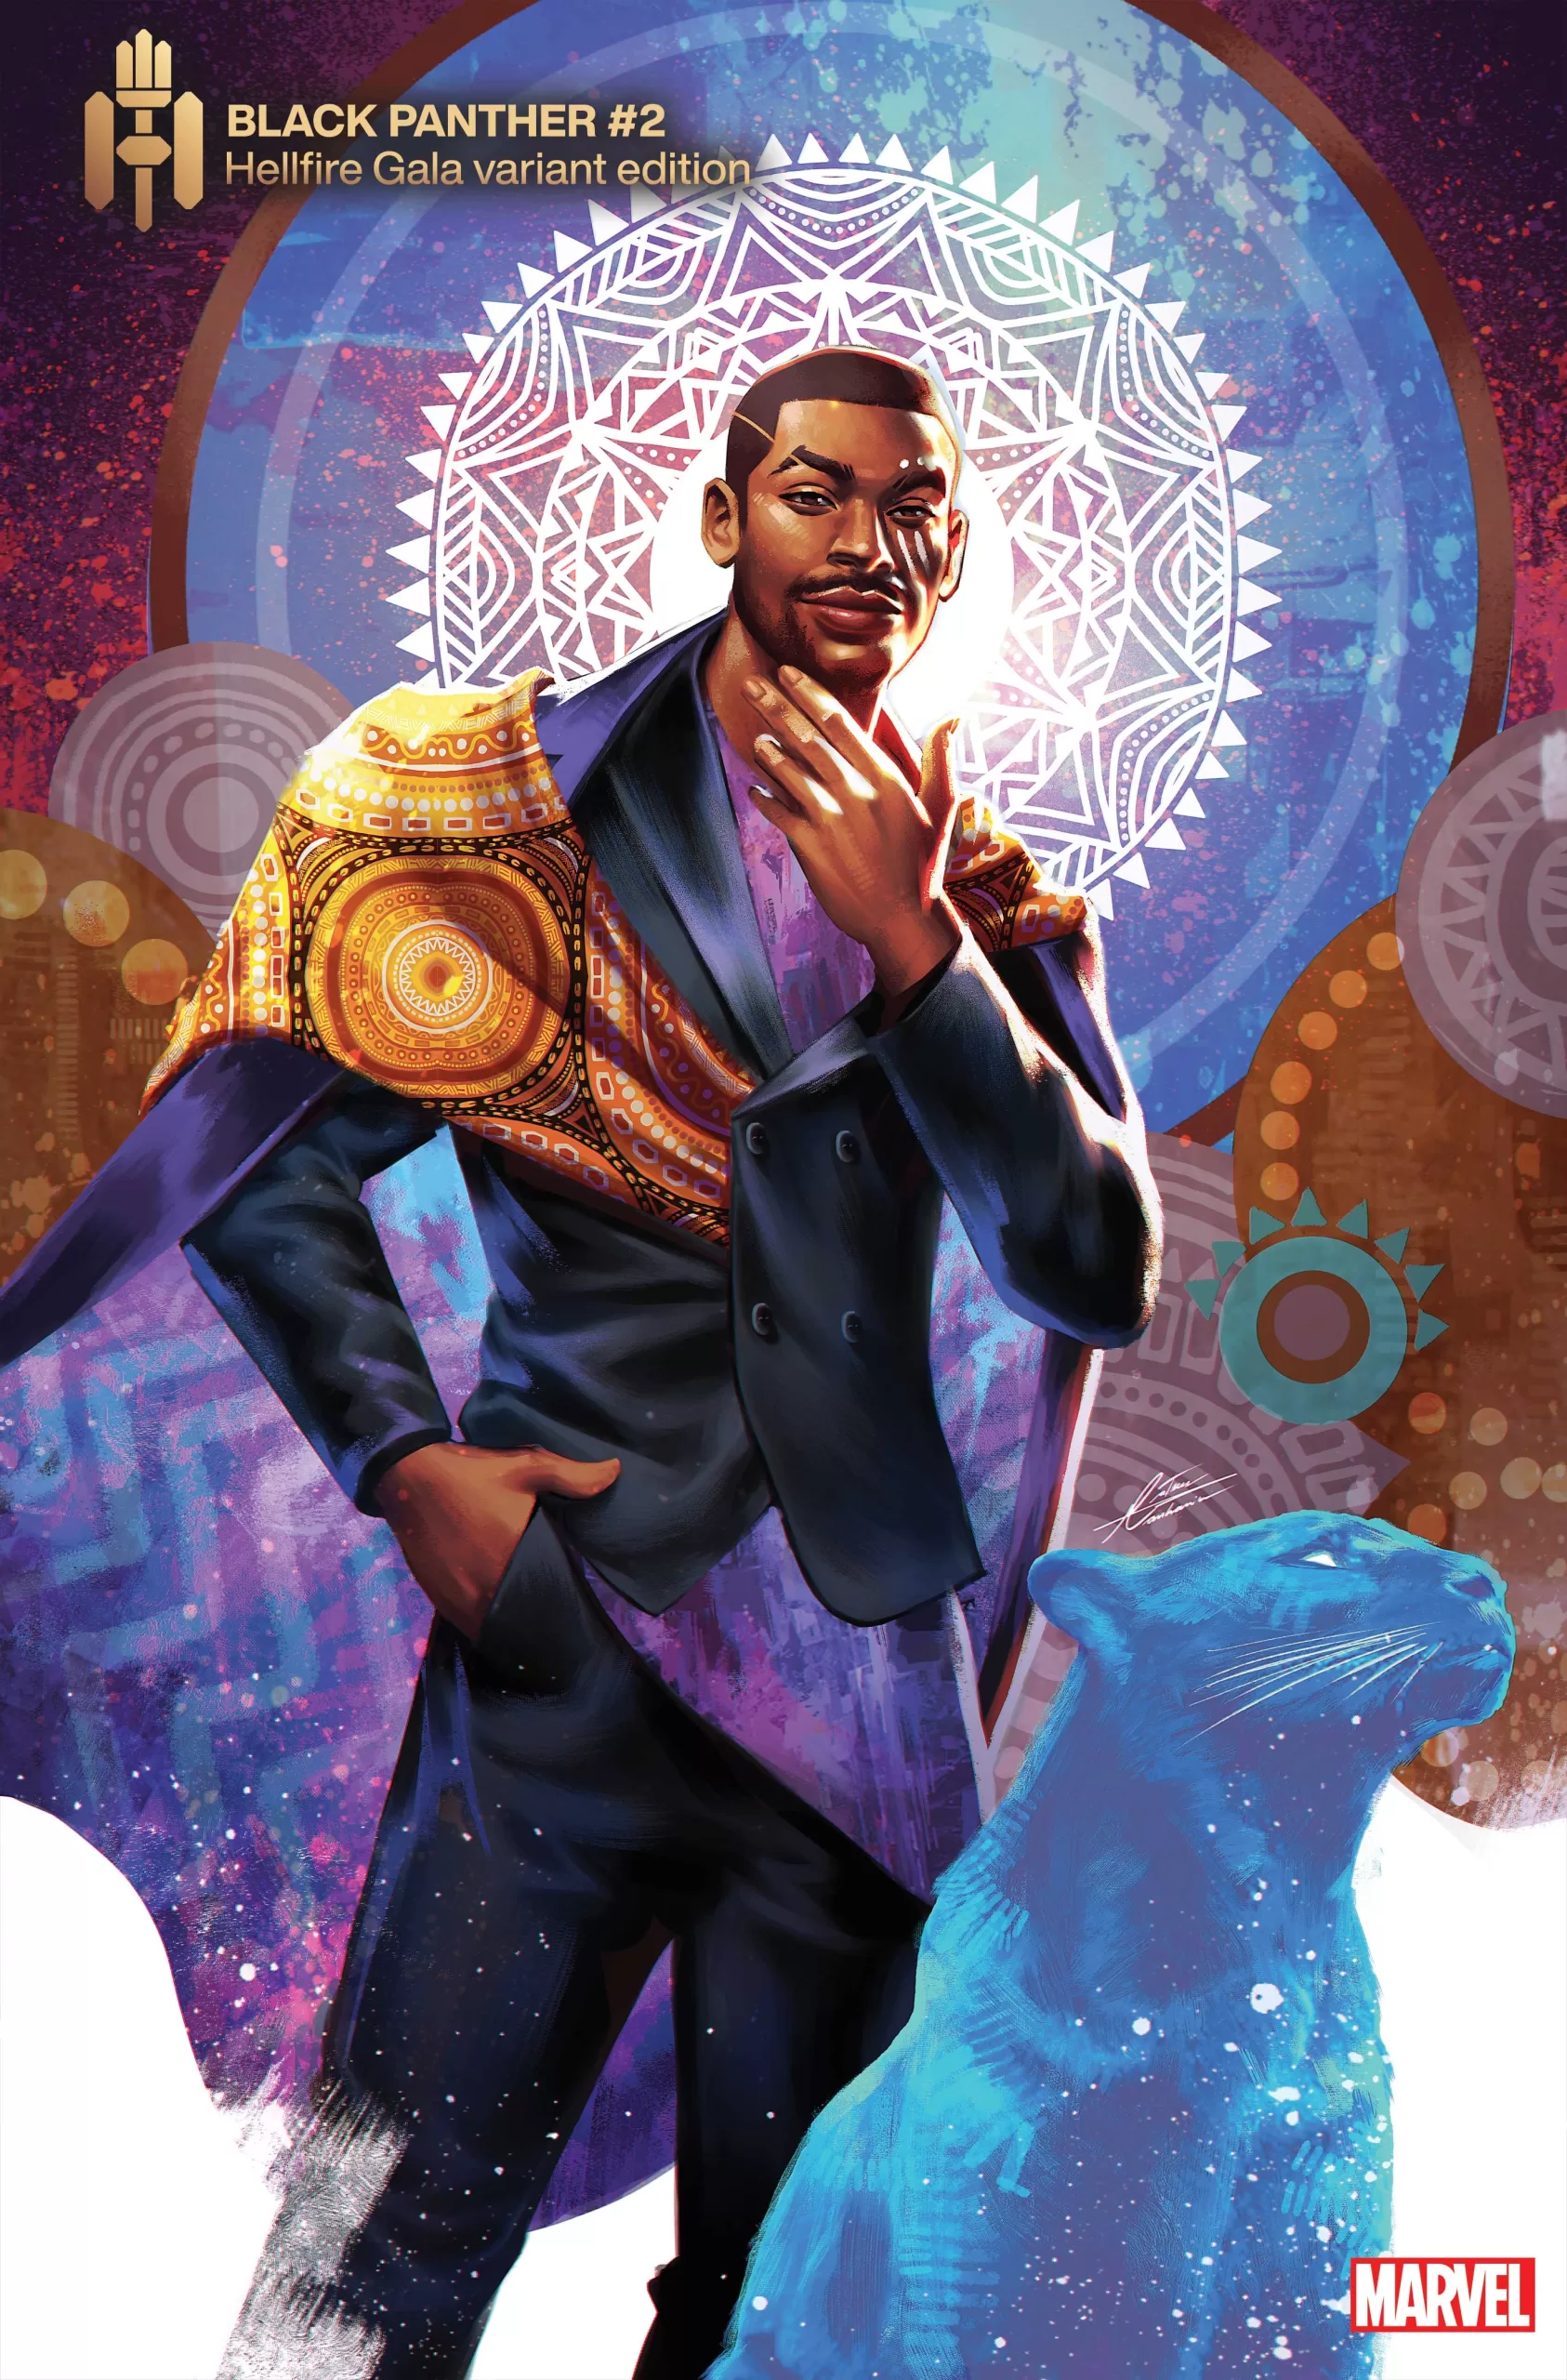 BLACK PANTHER #2 HELLFIRE GALA VARIANT COVER BY MATEUS MANHANINI